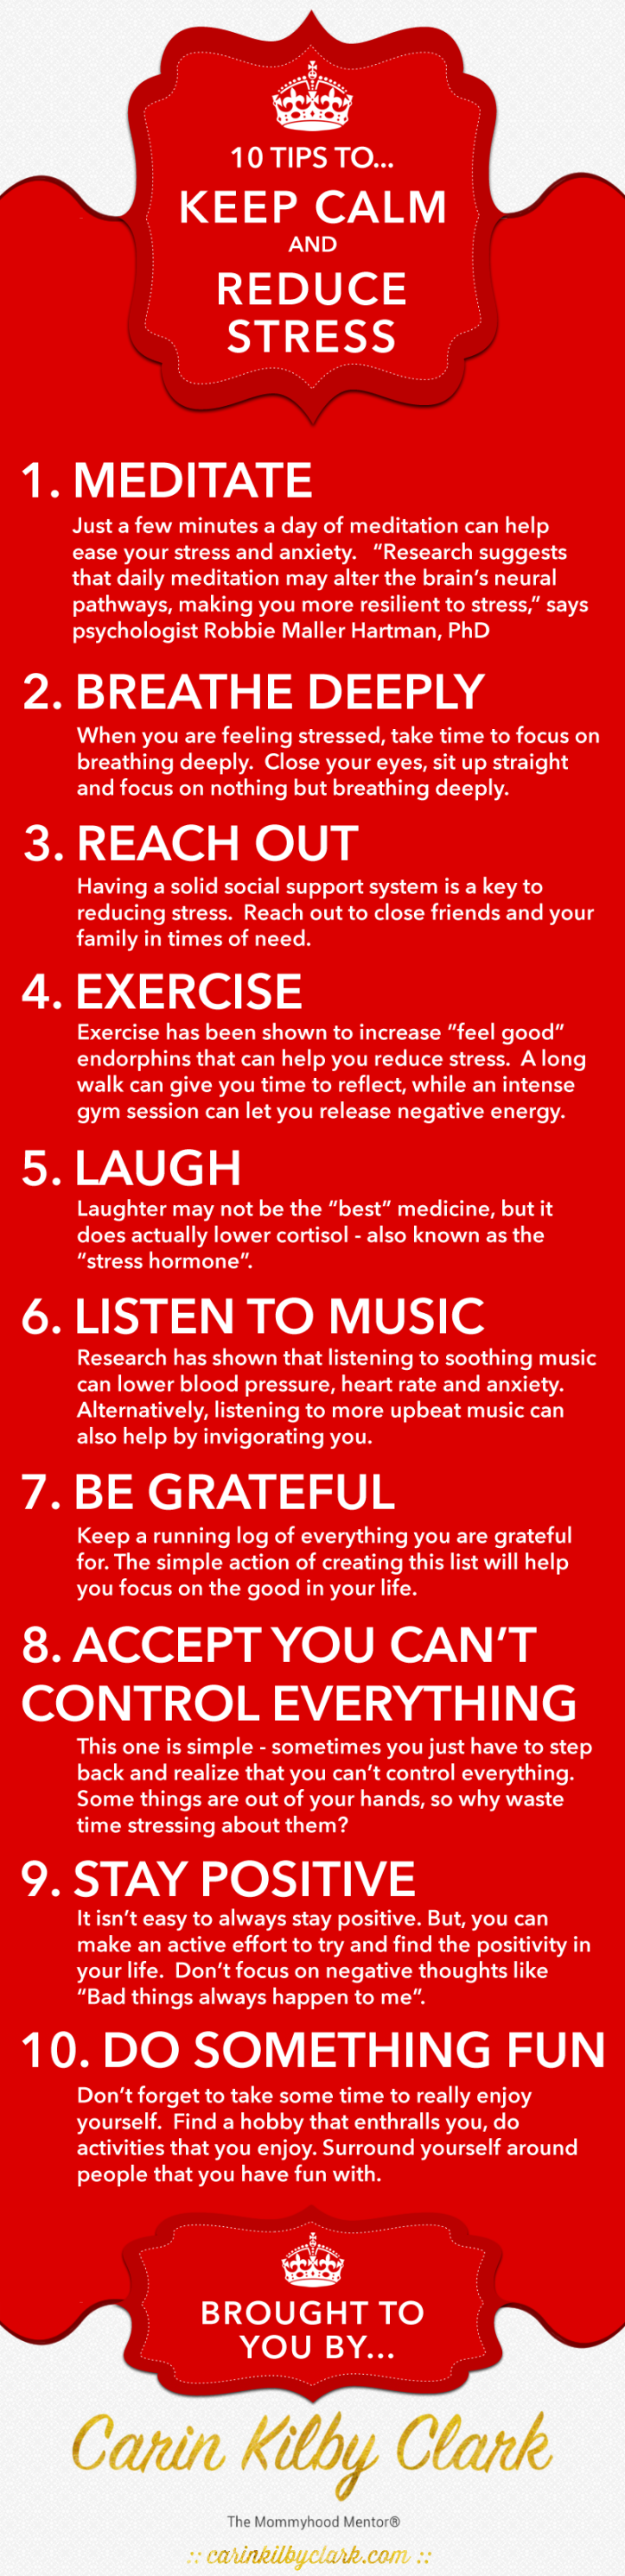 Reduce-Stress-Infographic